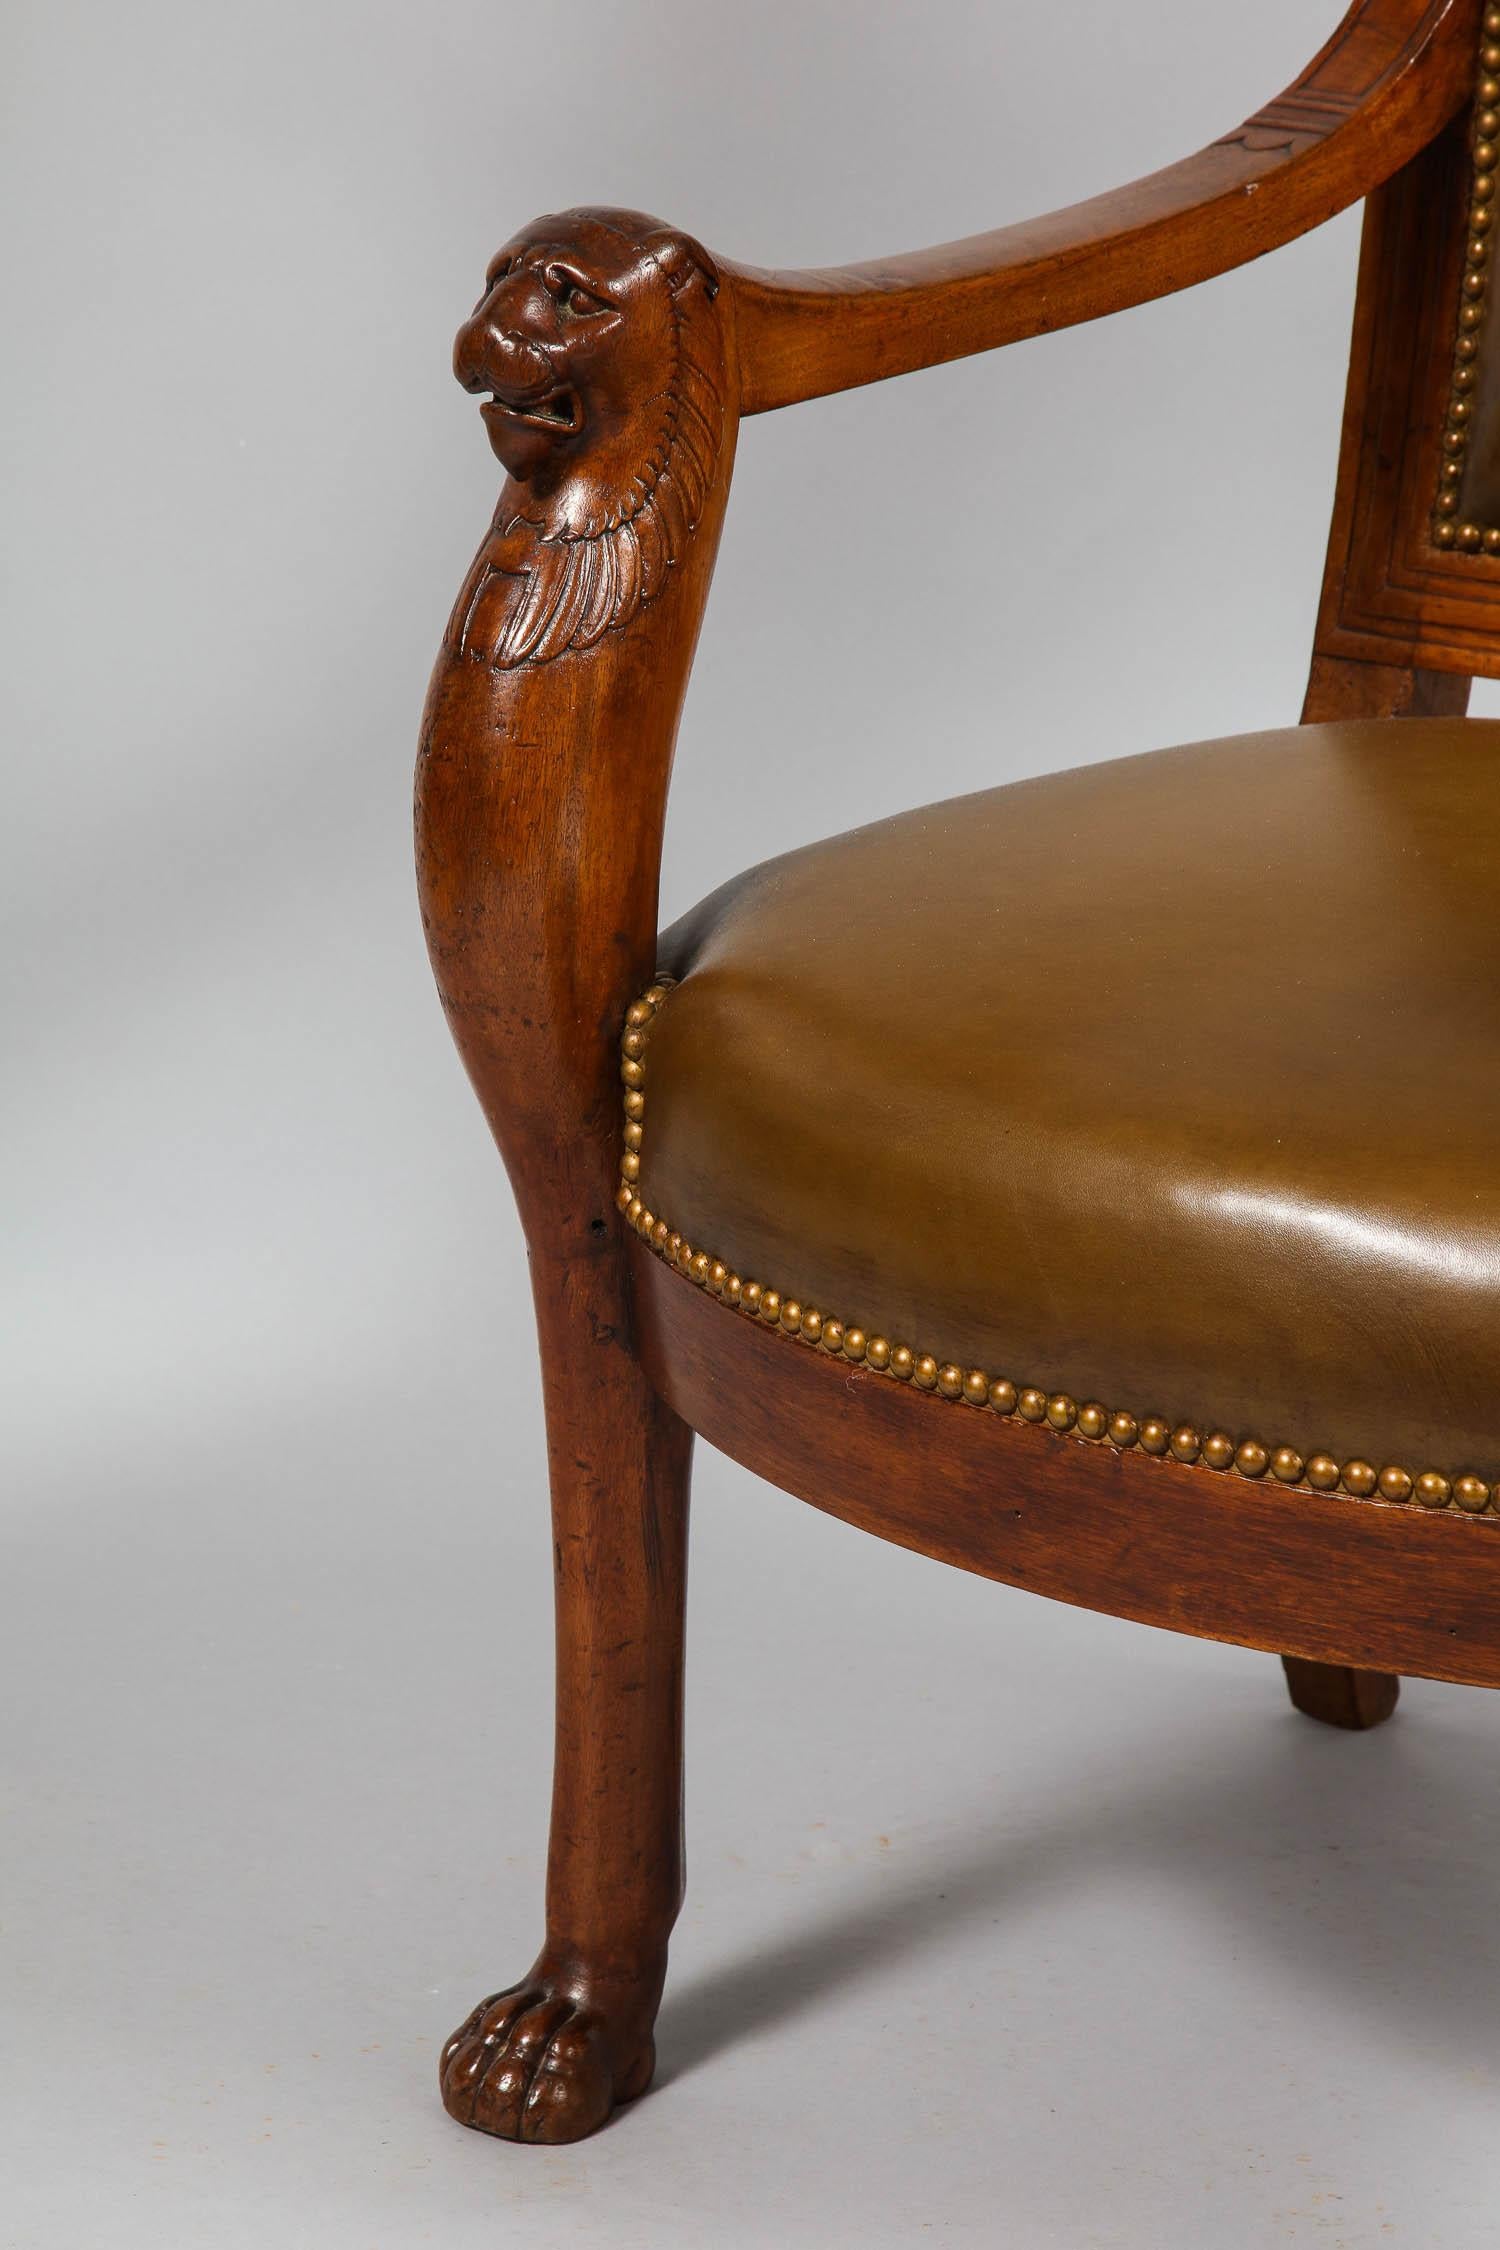 Rare and important carved mahogany Empire Period armchair attributed to Jacob Desmalter, France circa 1800, of neoclassical form inspired by the design of Percier et Fontaine, architects to the Emperor Napoleon Bonaparte, the armrests beautifully